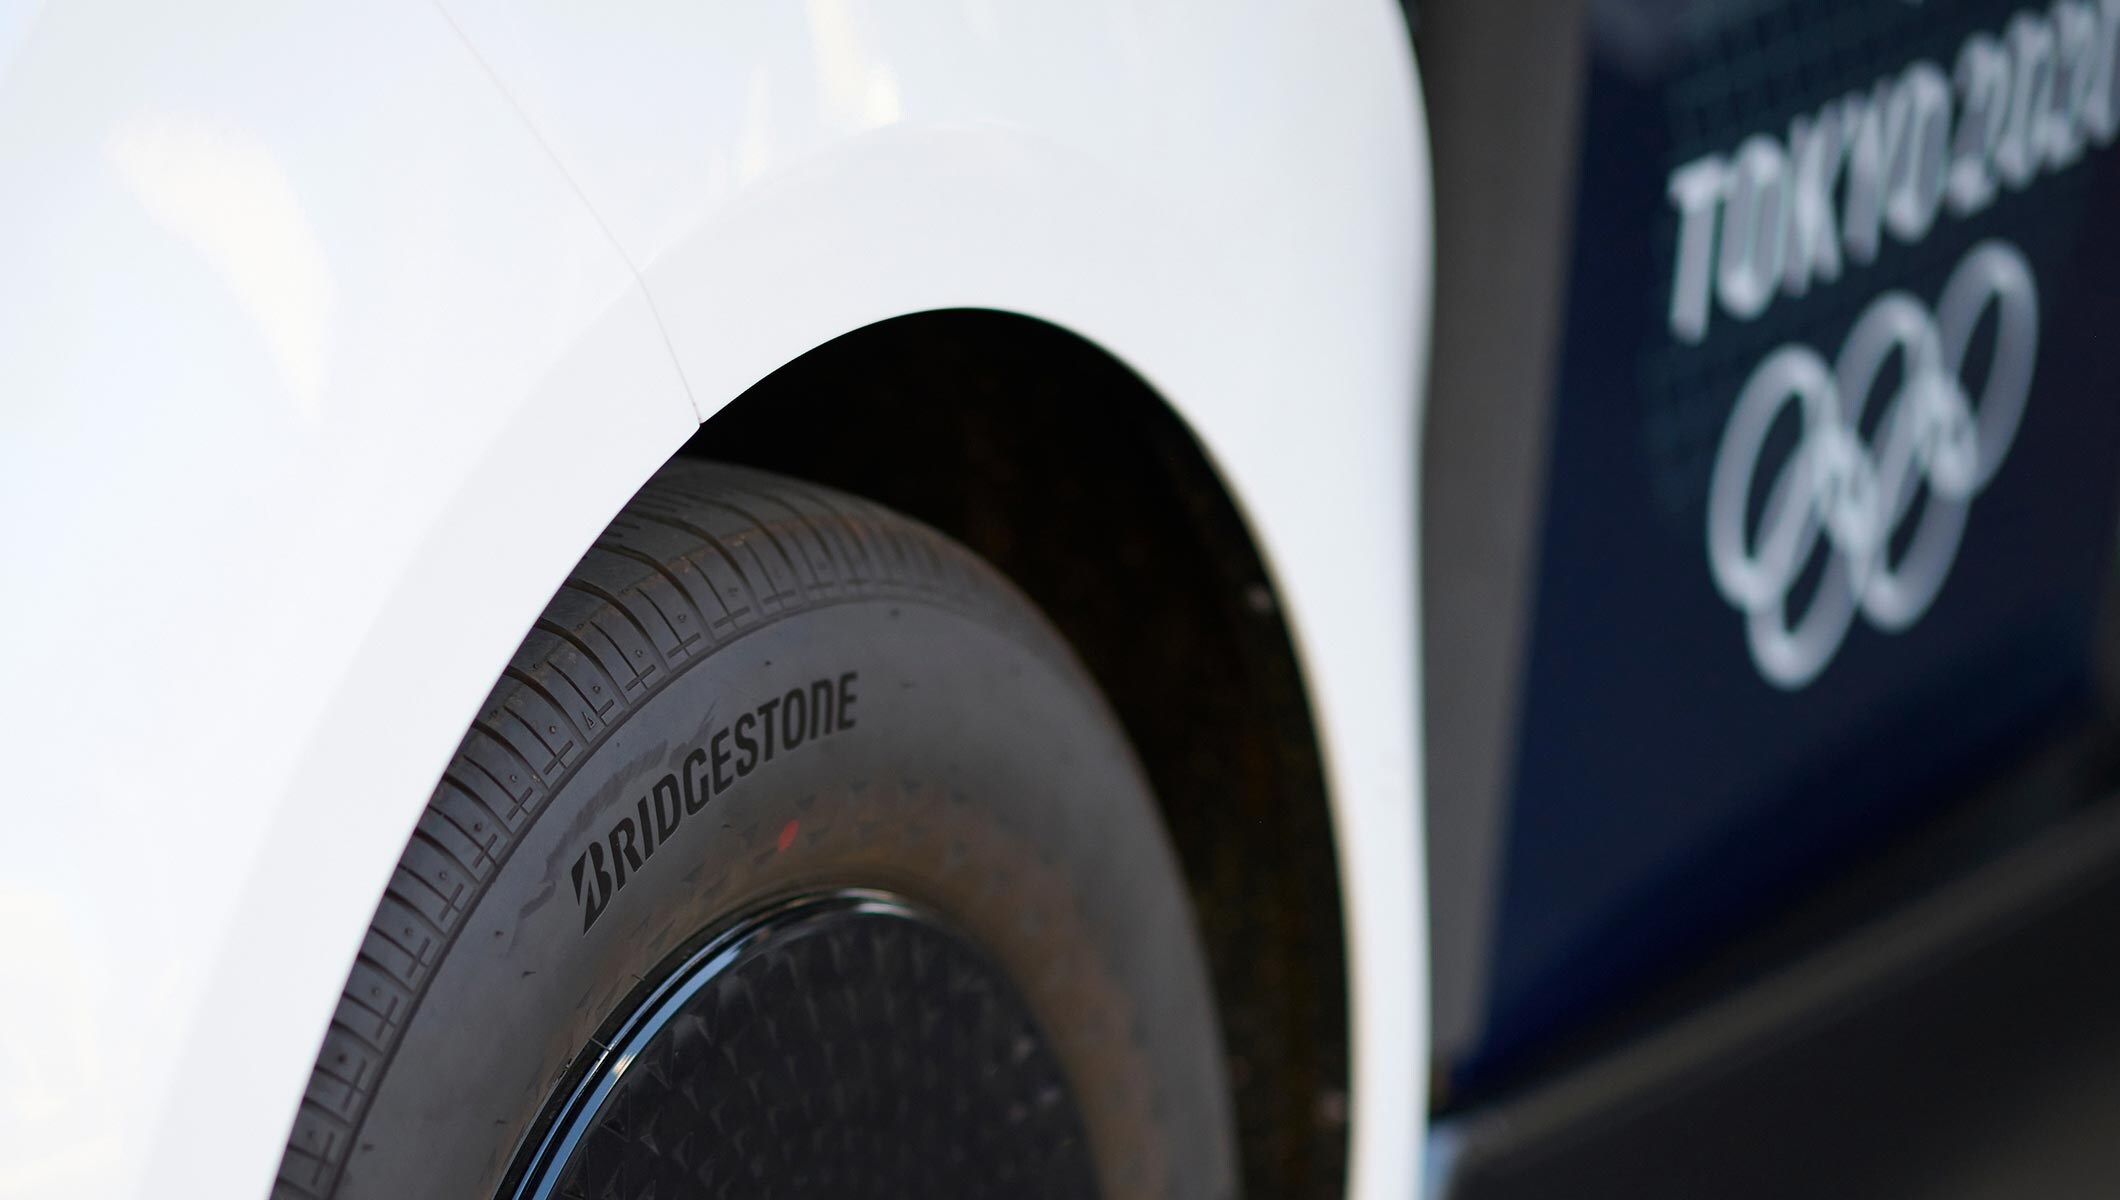 Bridgestone the official tyre of Tokyo 2020 on a vehicle in the Olympic Village